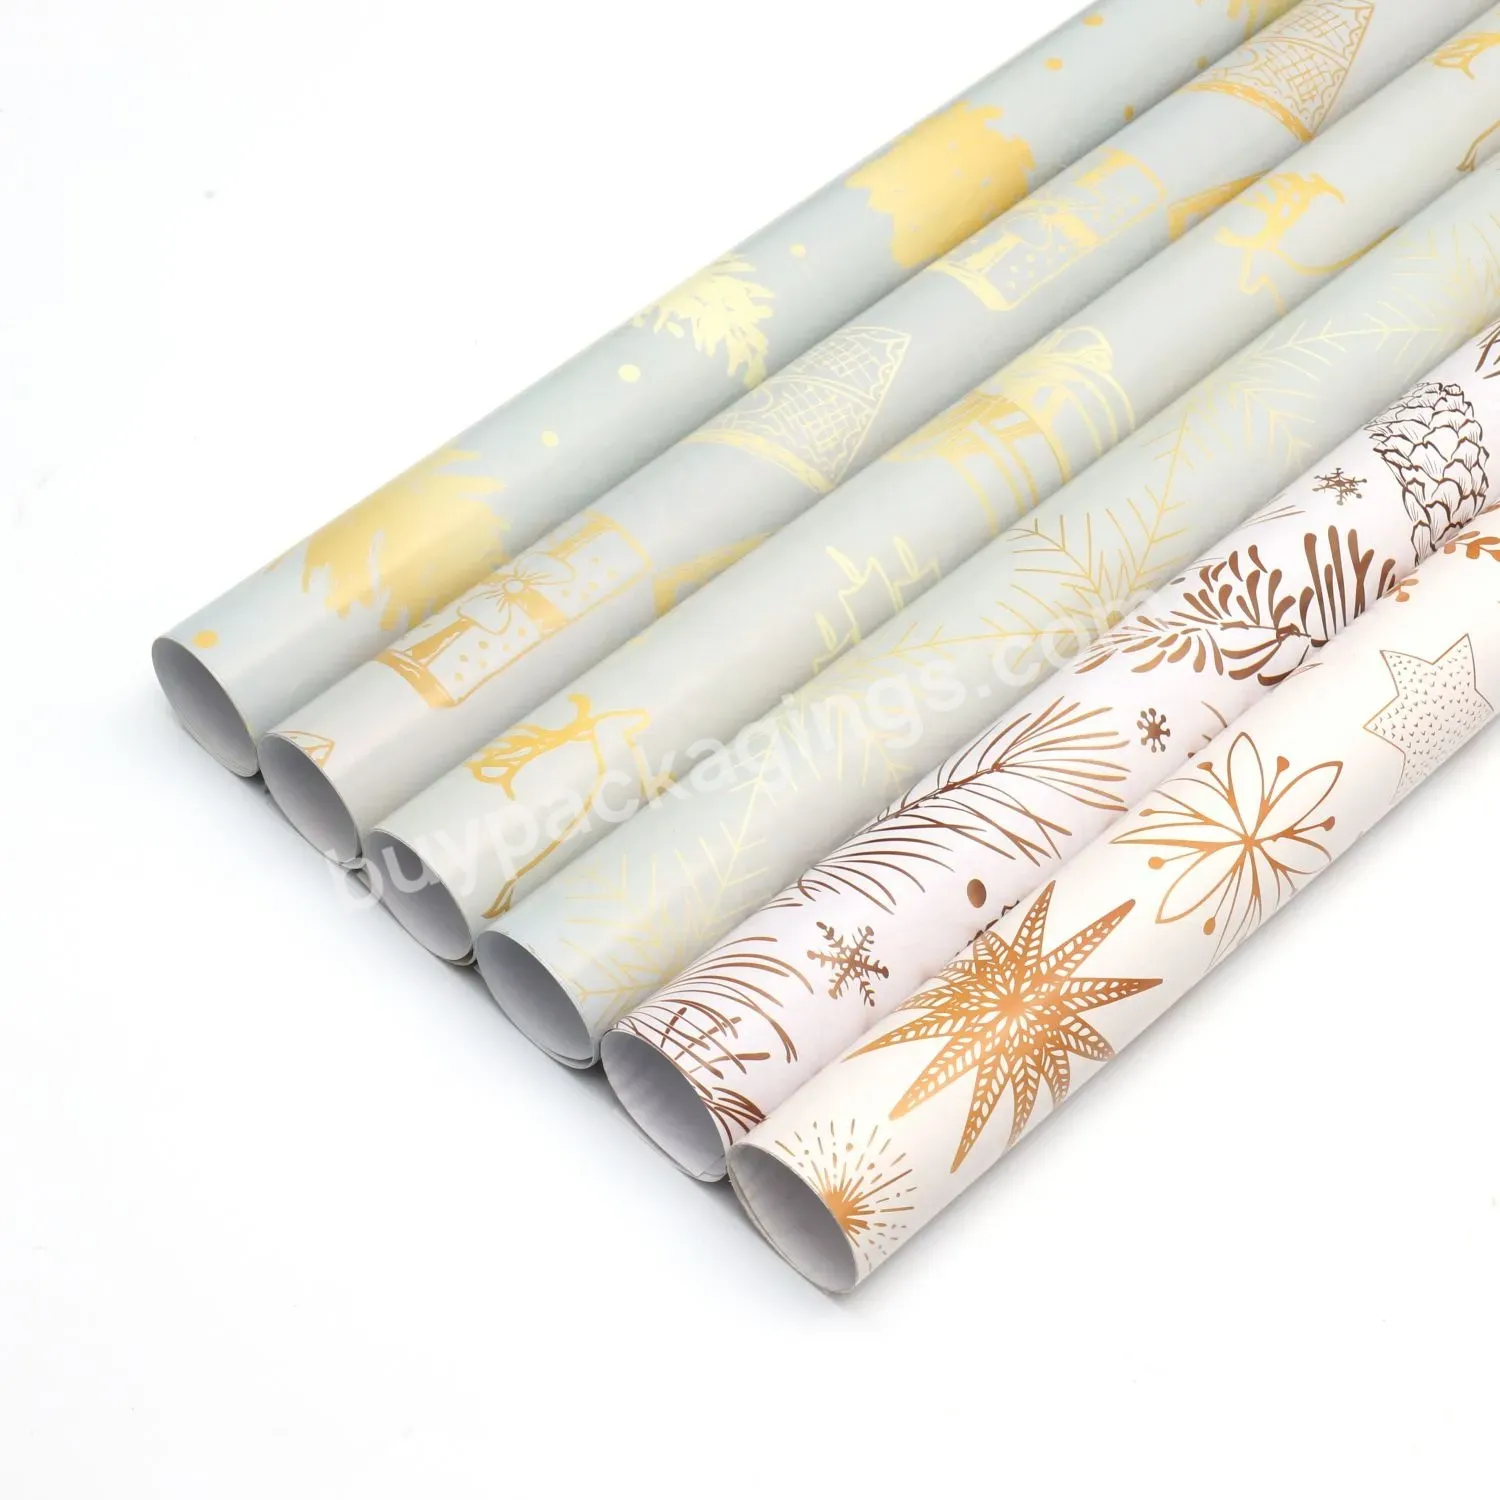 Christmas Gift Wrap Paper Kraft Wrapping Paper With Golden Foil Printed - Buy Christmas Gift Wrap Paper,Kraft Wrapping Paper,Golden Foil Printed.